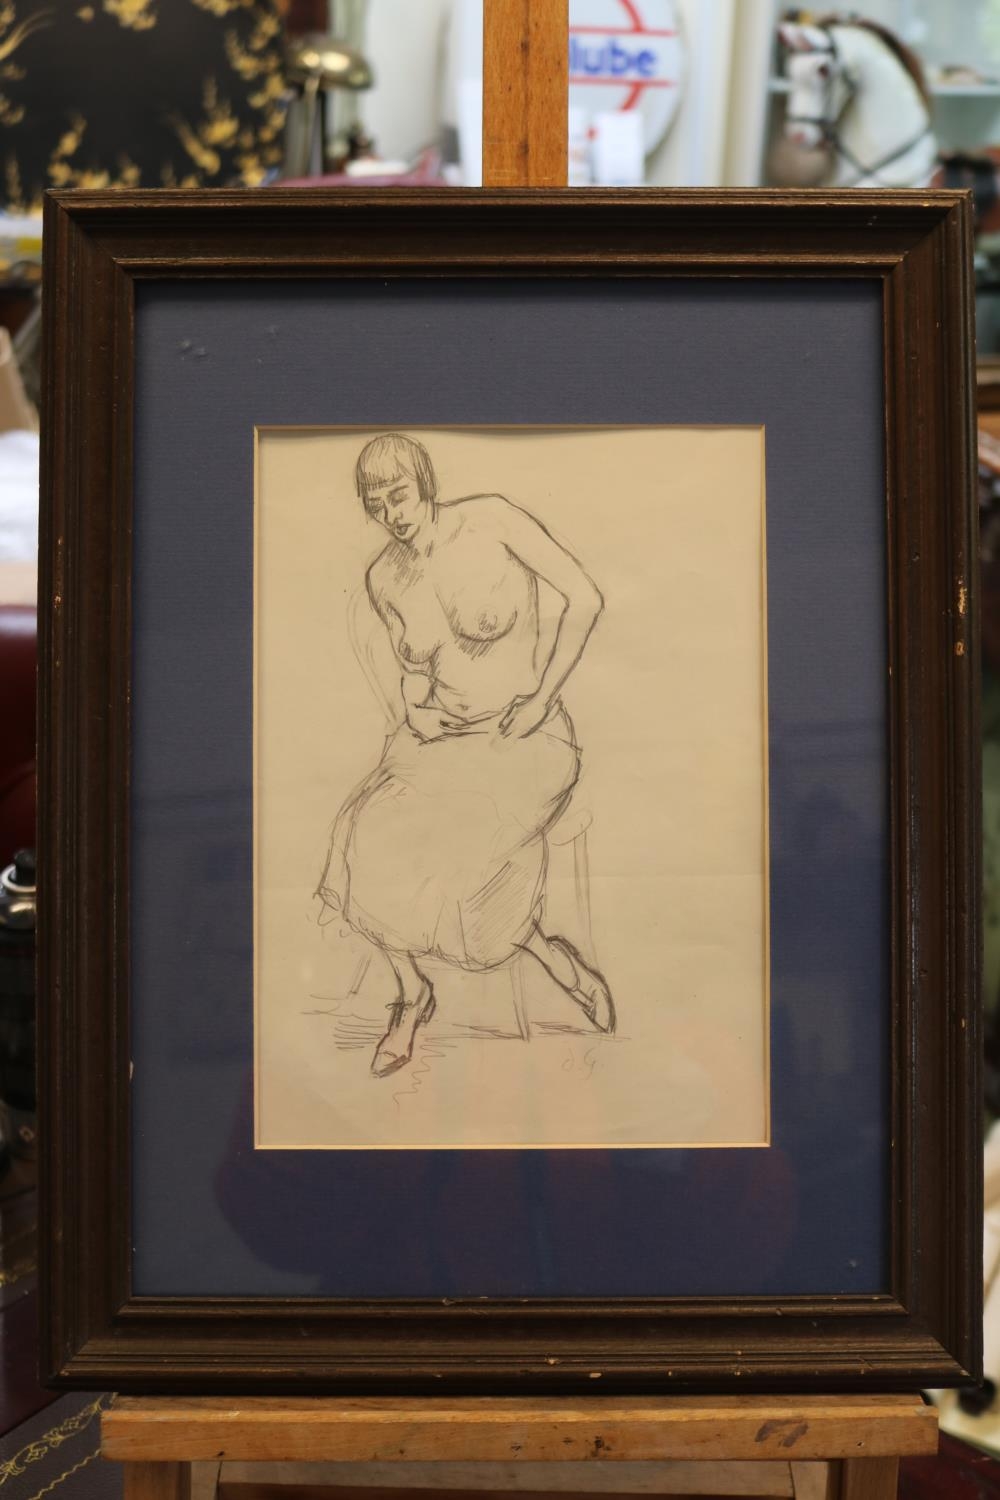 Duncan Grant (Scottish, 1885-1978) Pencil sketch full body portrait of a scantily clad (nude) female - Image 2 of 4